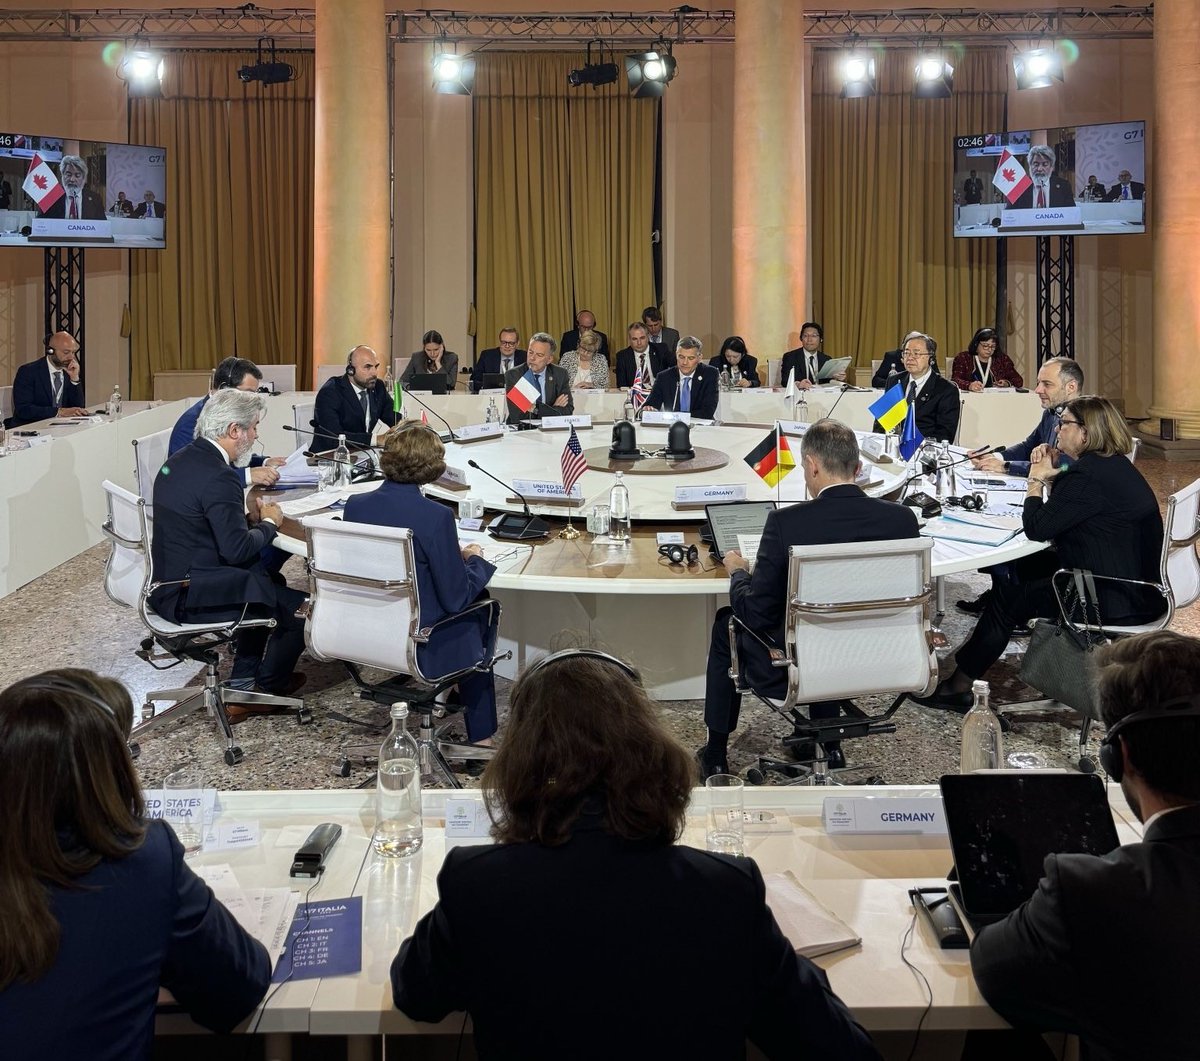 Minister Rodriguez participated in a special session on #Ukraine today where he reiterated that Canada will stand alongside other @G7 countries to support Ukraine’s recovery and reconstruction, including through the Canada co-led @ITF_Forum Common Interest Group for Ukraine.